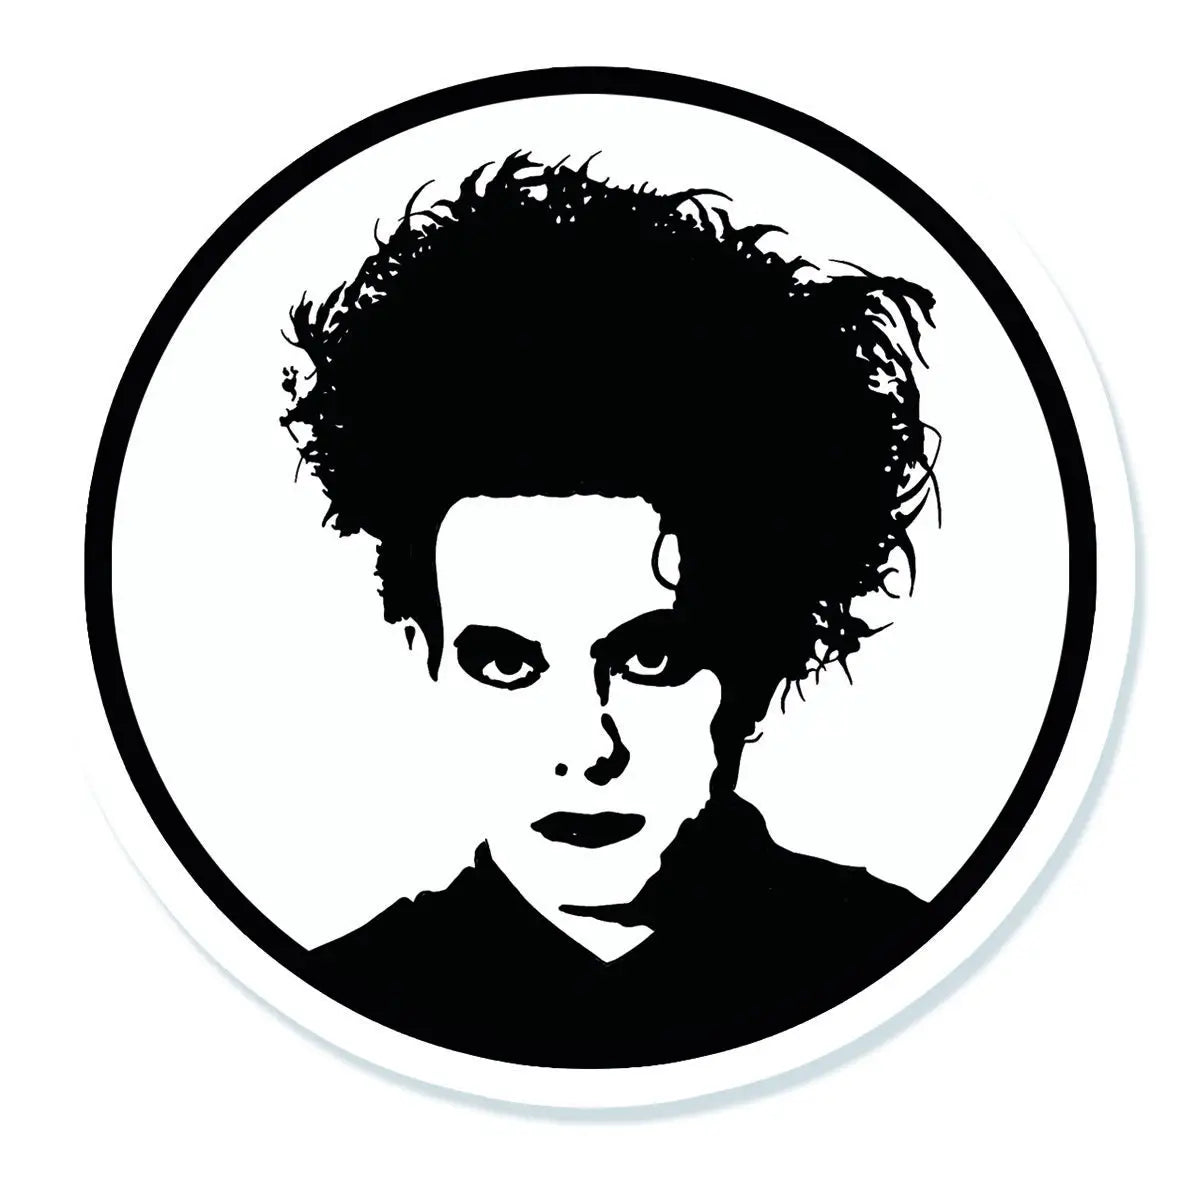 black and white round vinyl sticker of a stylized portrait of Robert Smith from the Cure